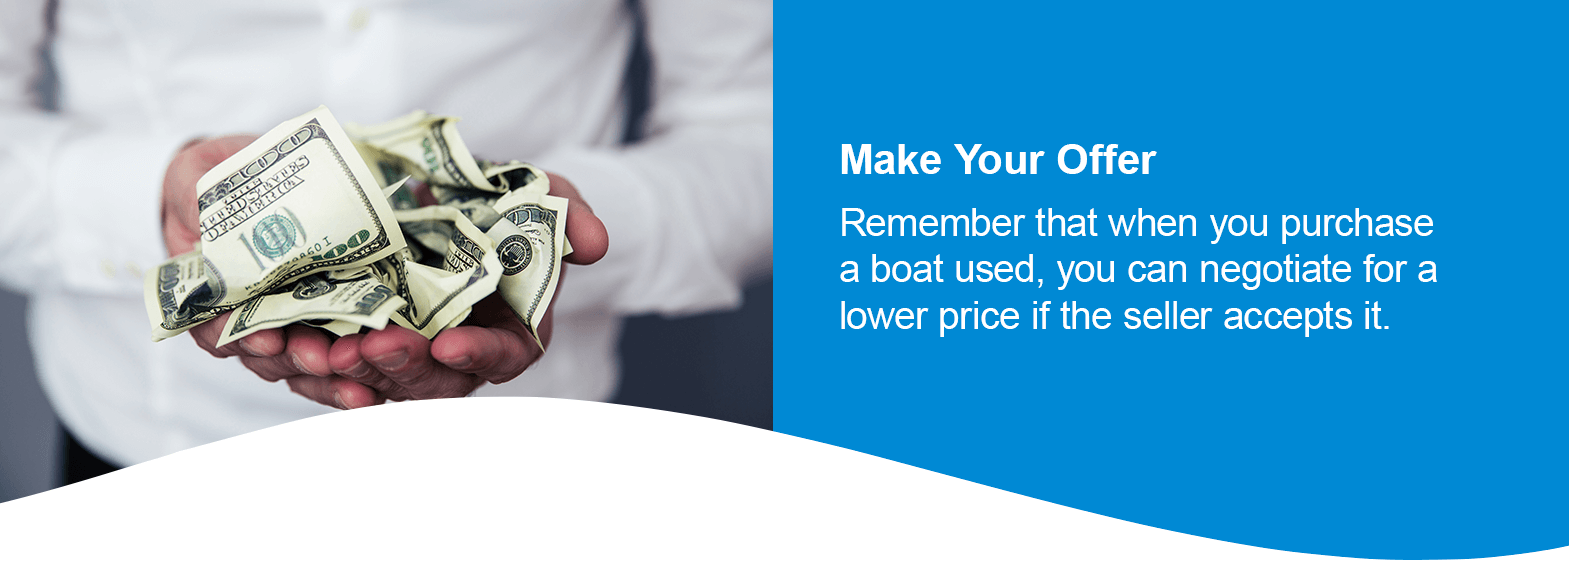 Make Your Offer. Remember that when you purchase a boat used, you can negotiate for a lower price if the seller accepts it.